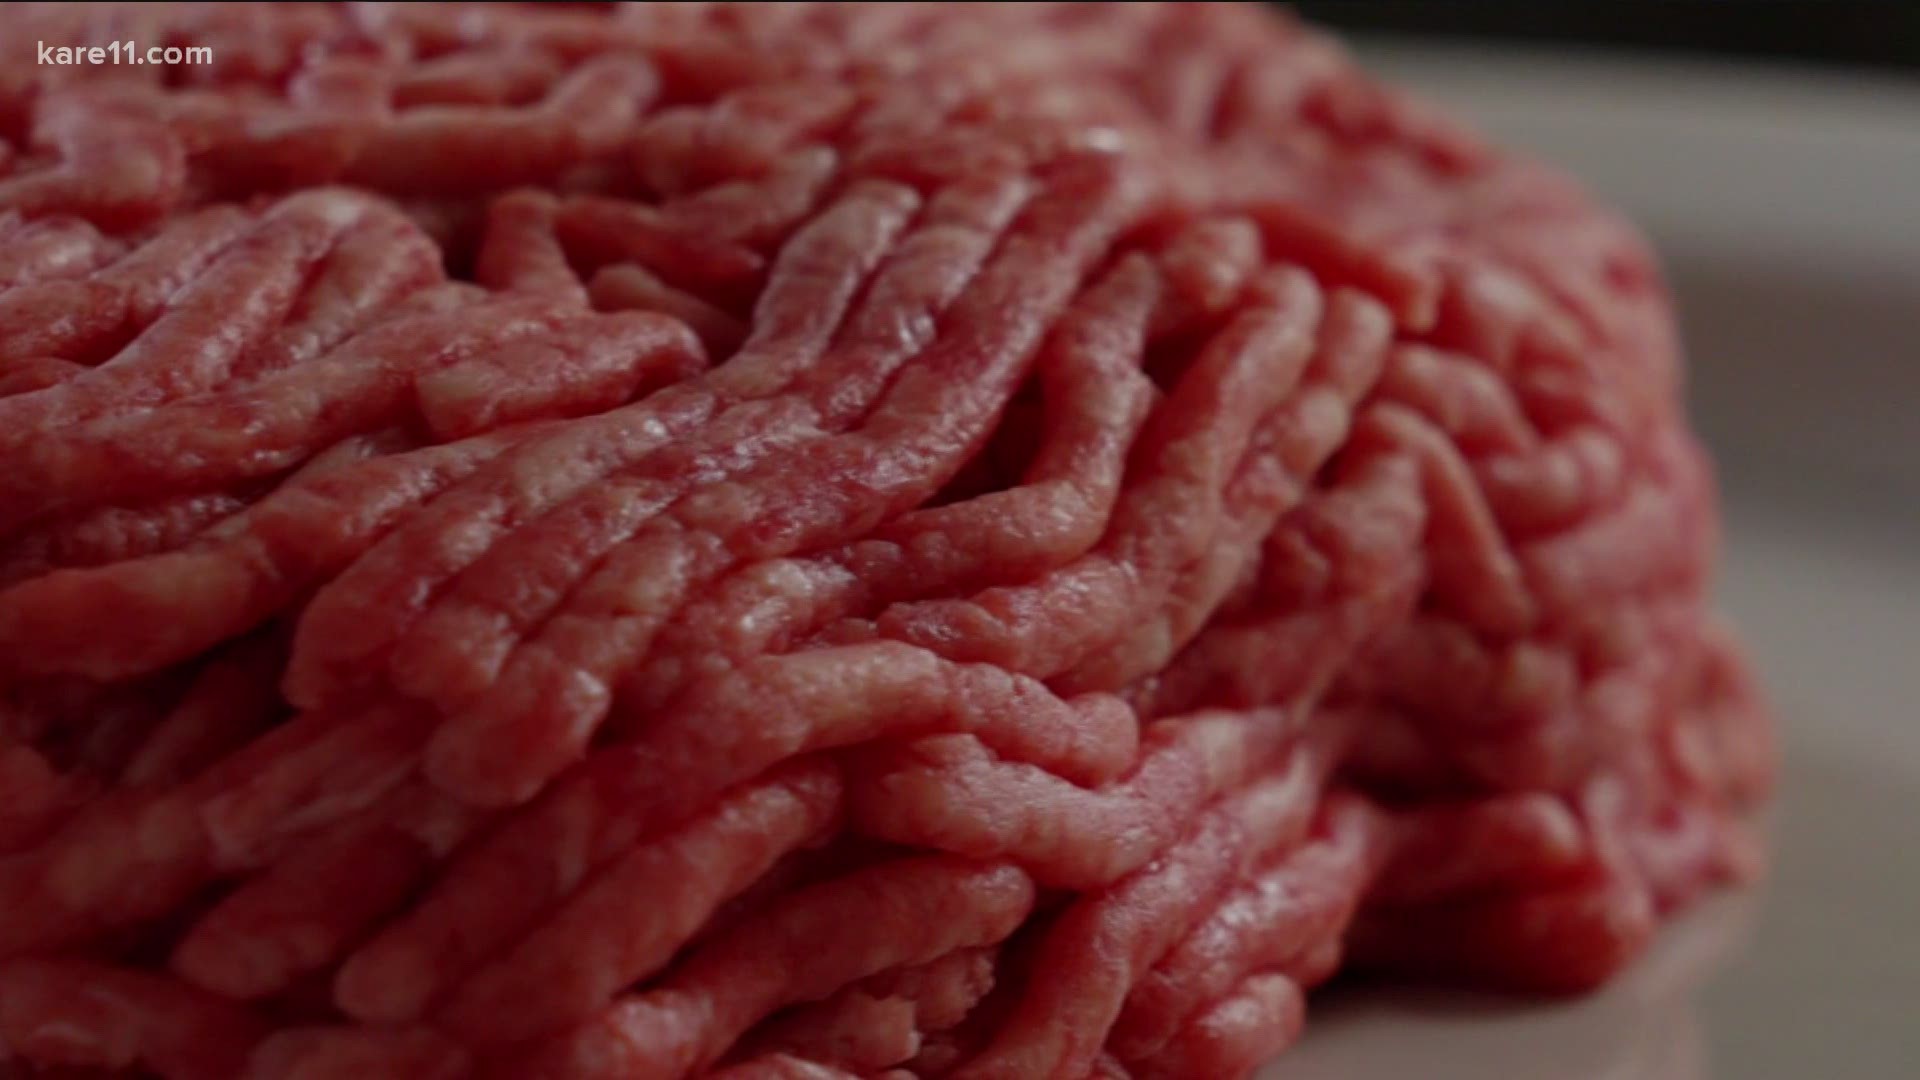 Tradition or not, the Wisconsin Department of Health Services says eating raw beef can have a risk of bacterial infection.